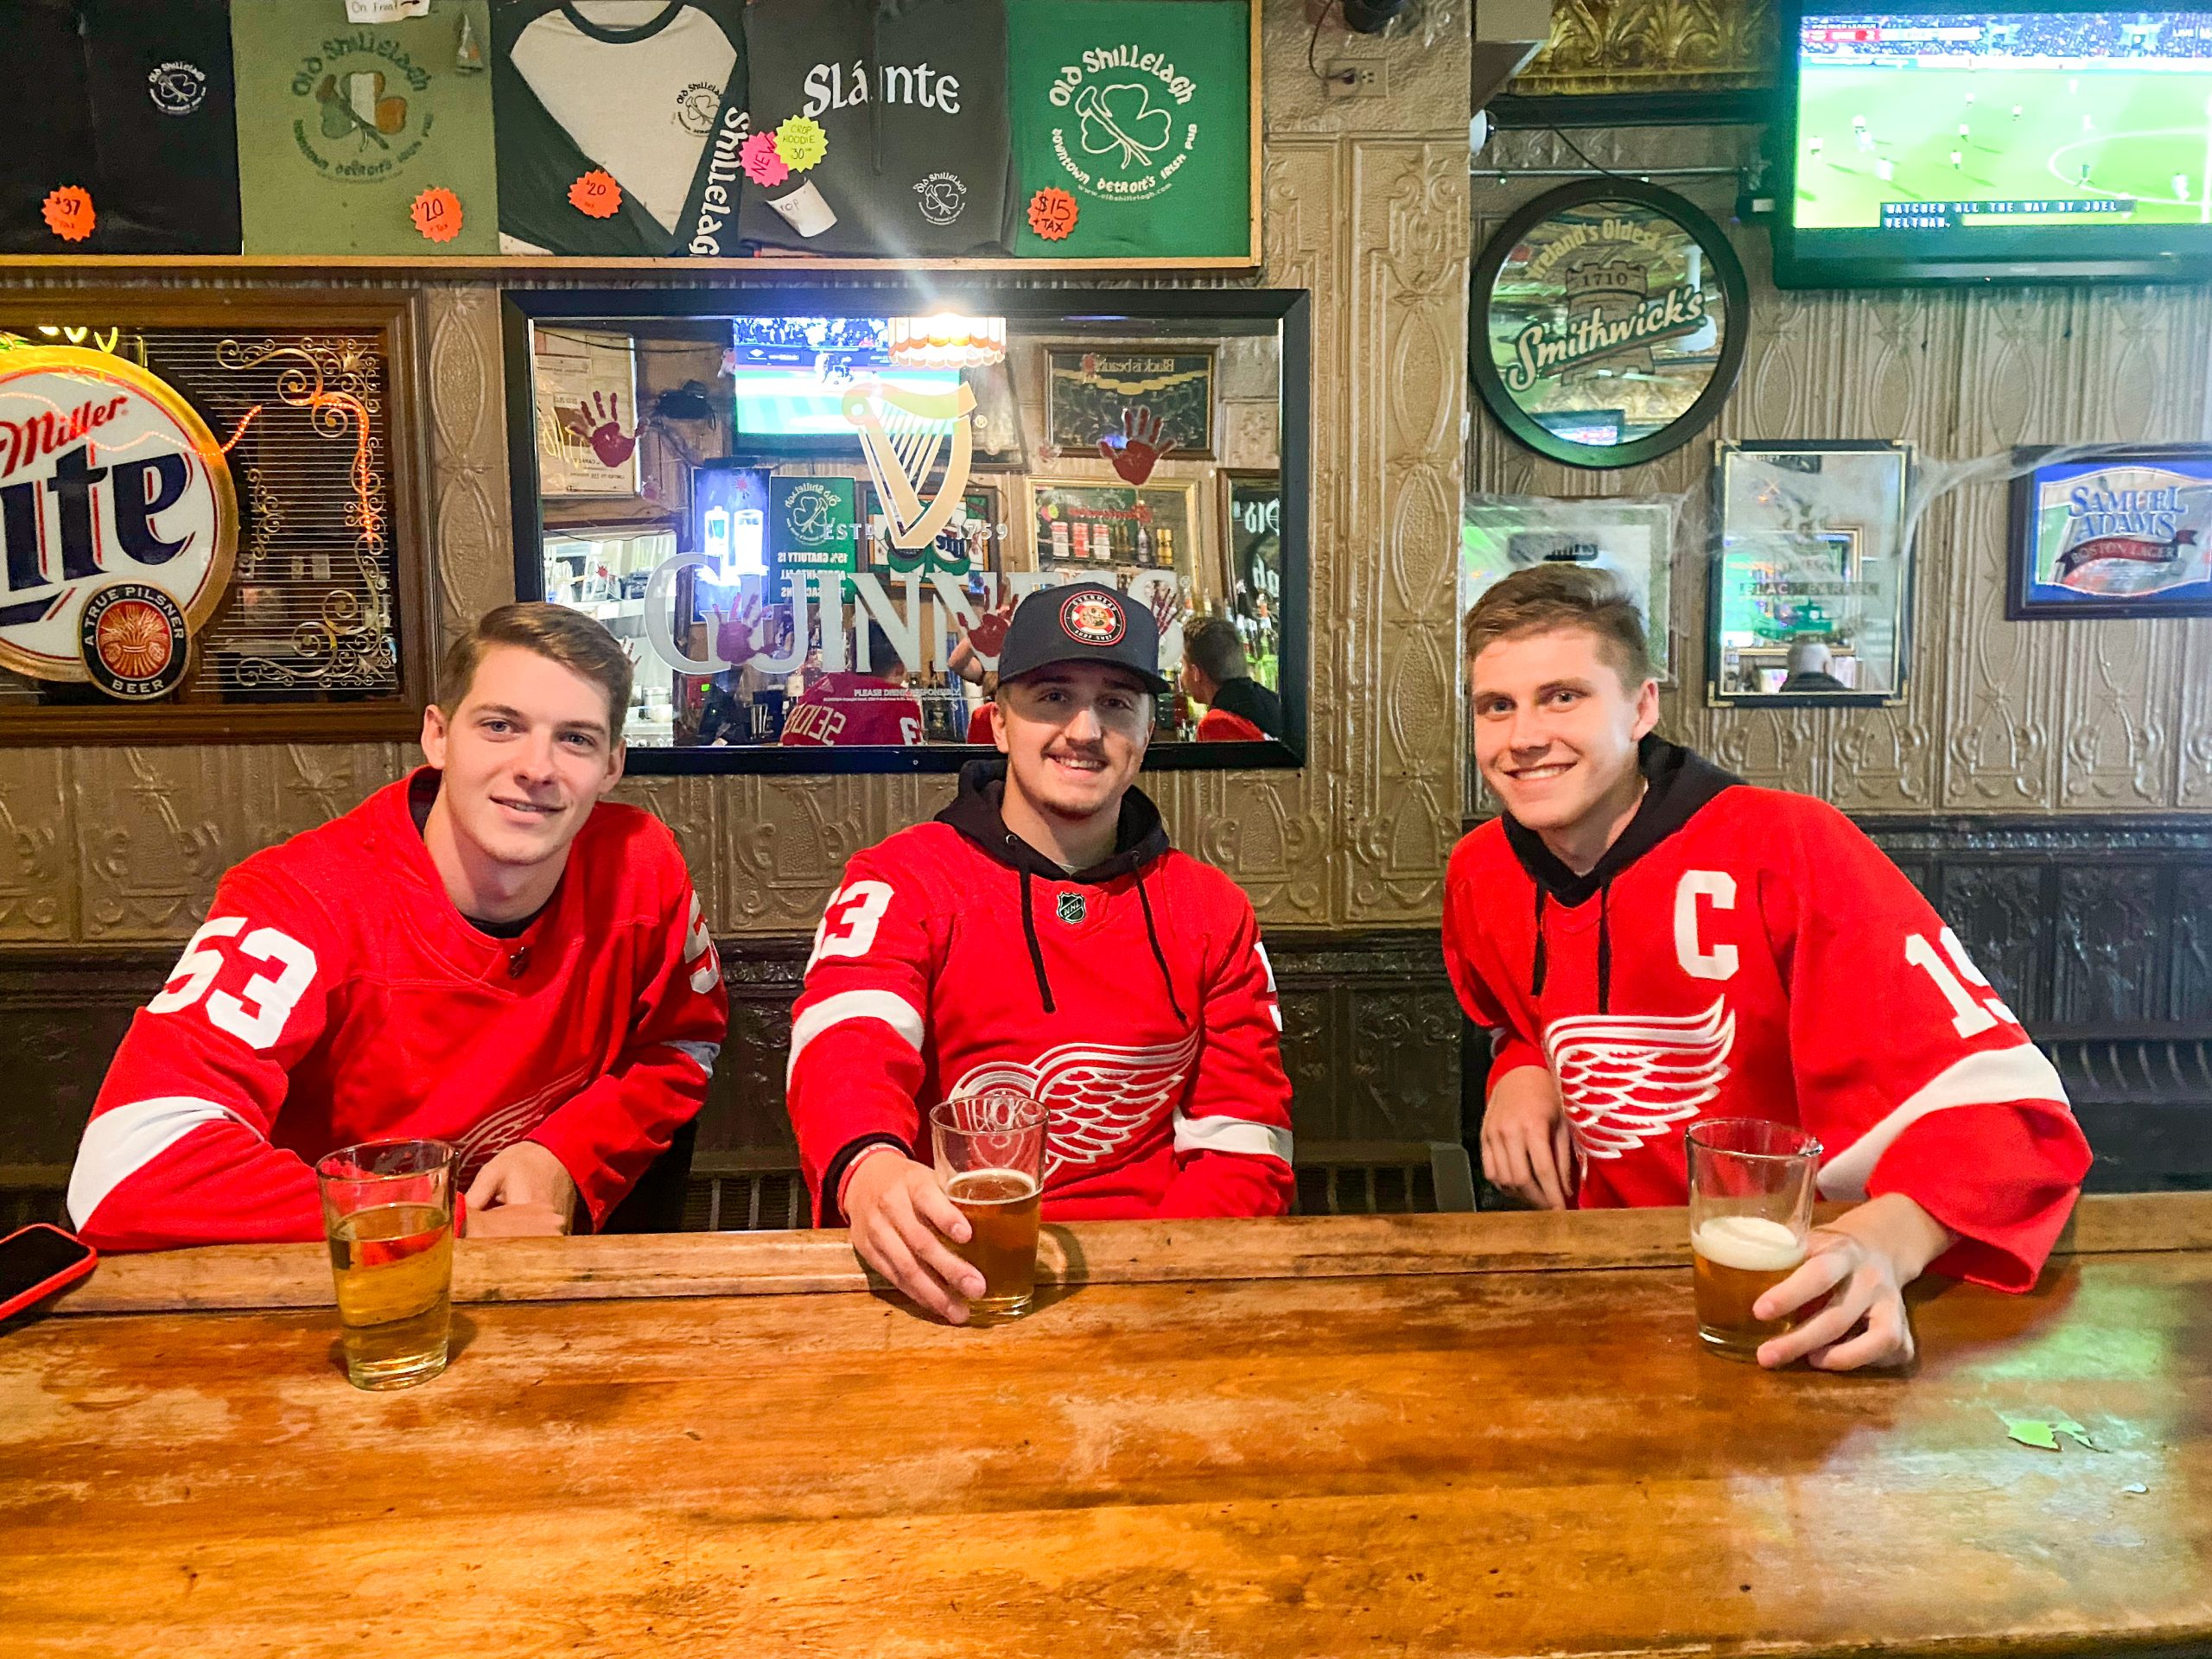 Downtown Detroit bar before the redwings